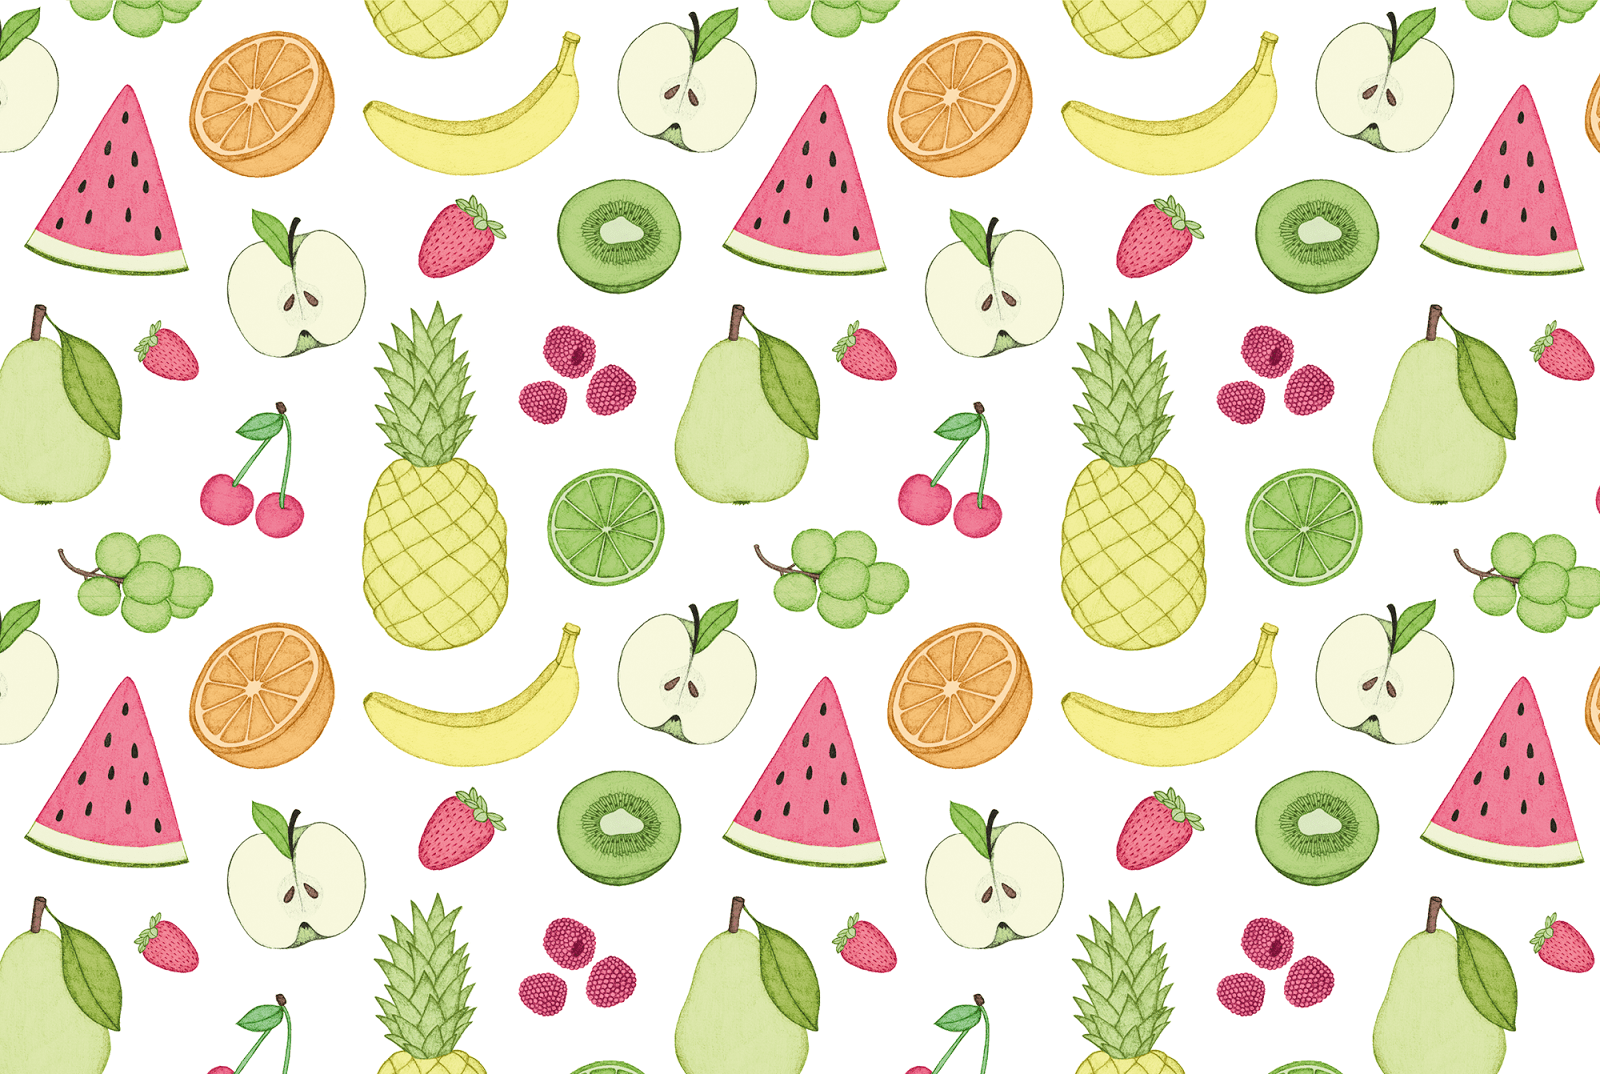 A colorful pattern of fruits including watermelon, kiwi, apple, pear, pineapple, banana, and strawberry. - Fruit